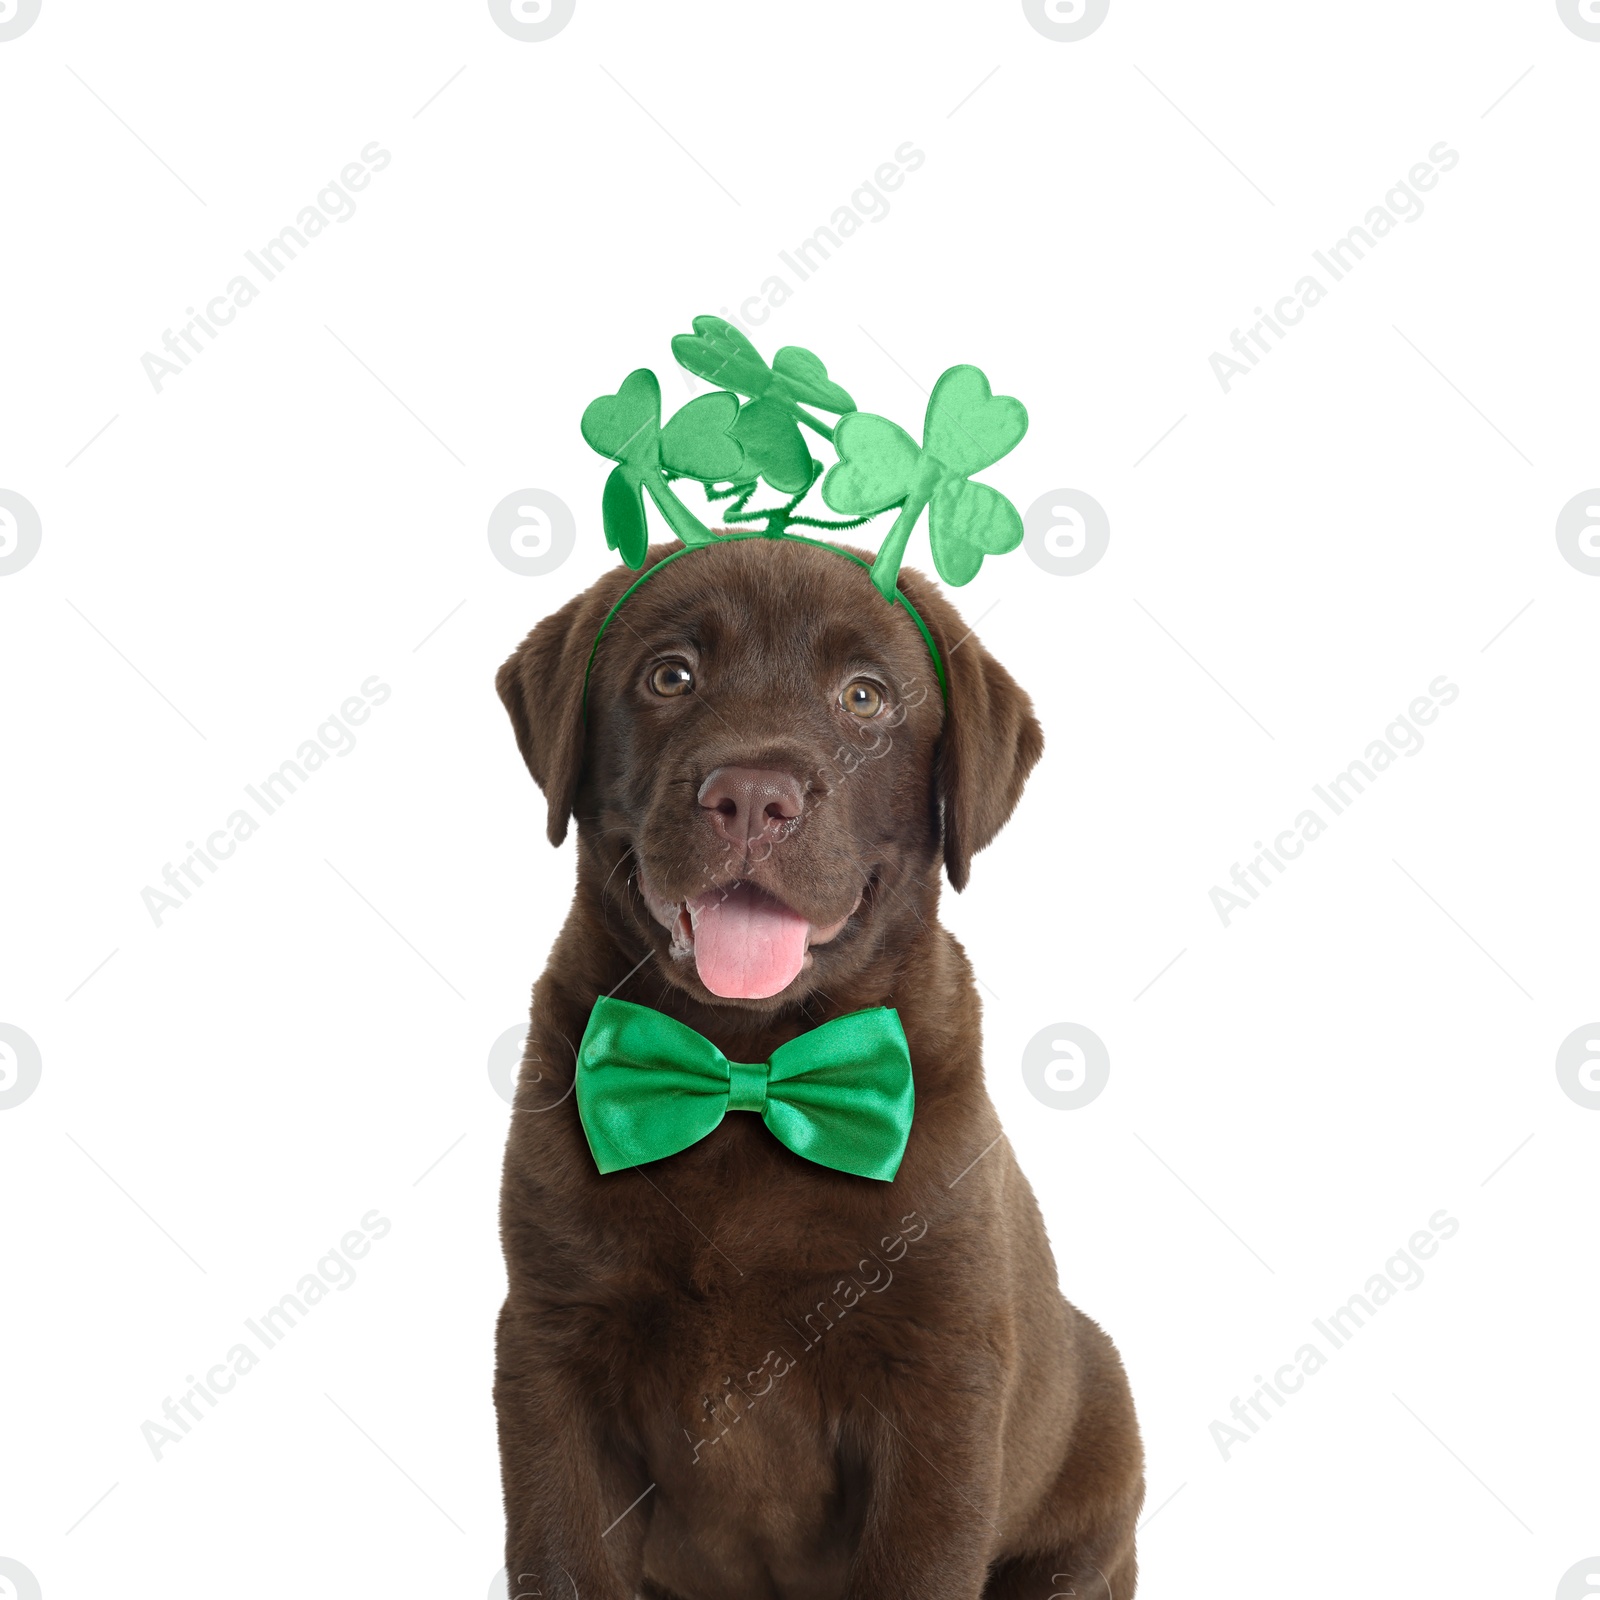 Image of St. Patrick's day celebration. Cute Chocolate Labrador puppy wearing headband with clover leaves and green bow tie isolated on white